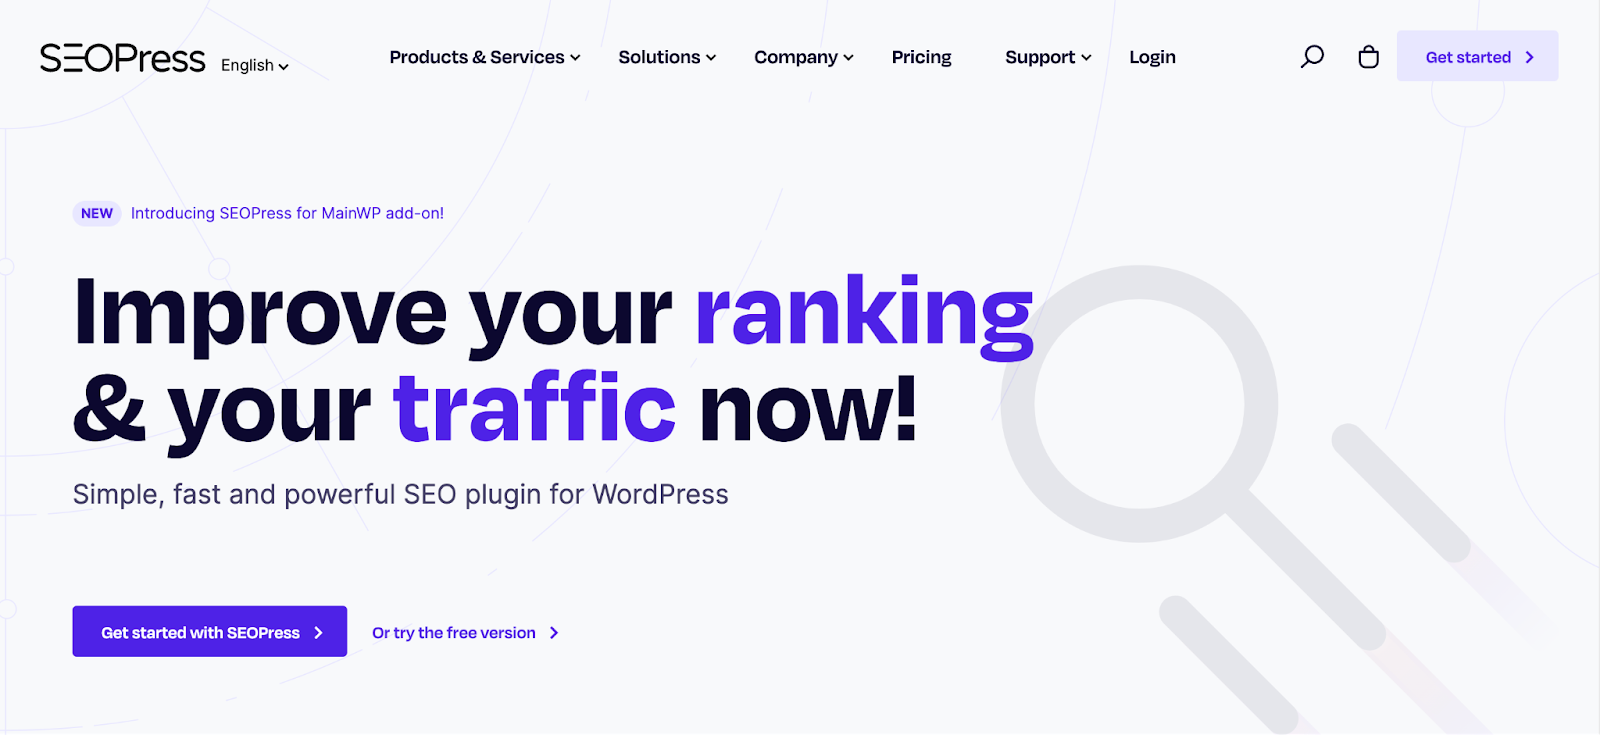 SEOPress is an all-in-one SEO solution